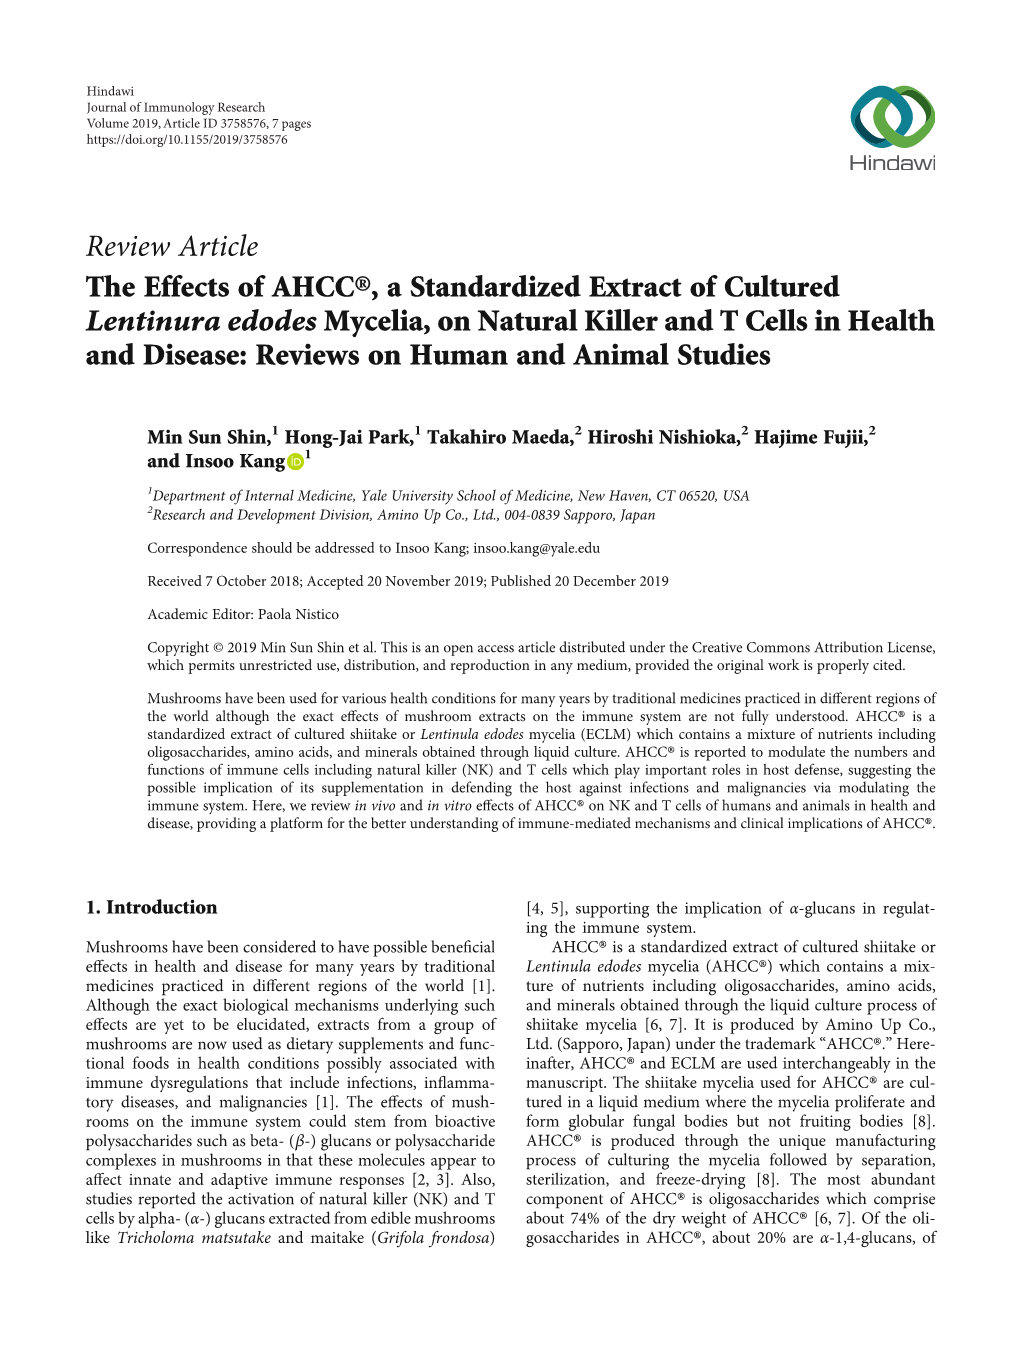 The Effects of AHCC®, a Standardized Extract of Cultured Lentinura